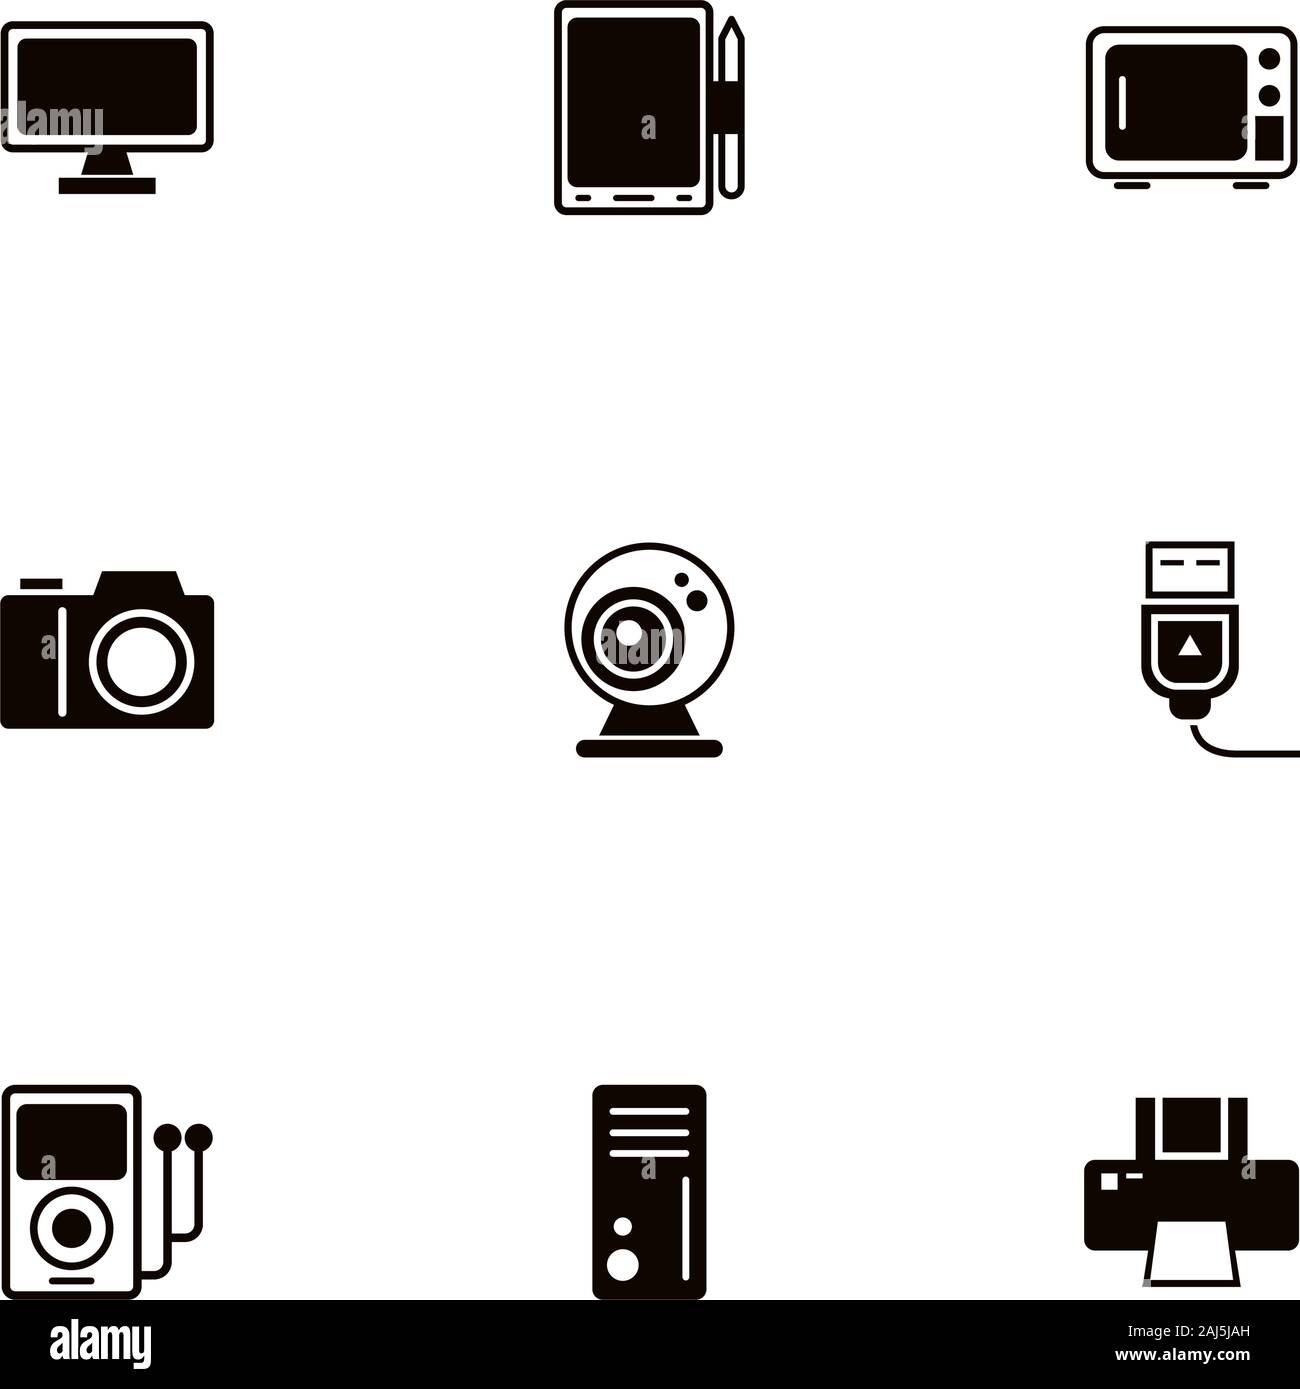 bundle of electronics devices icons Stock Vector